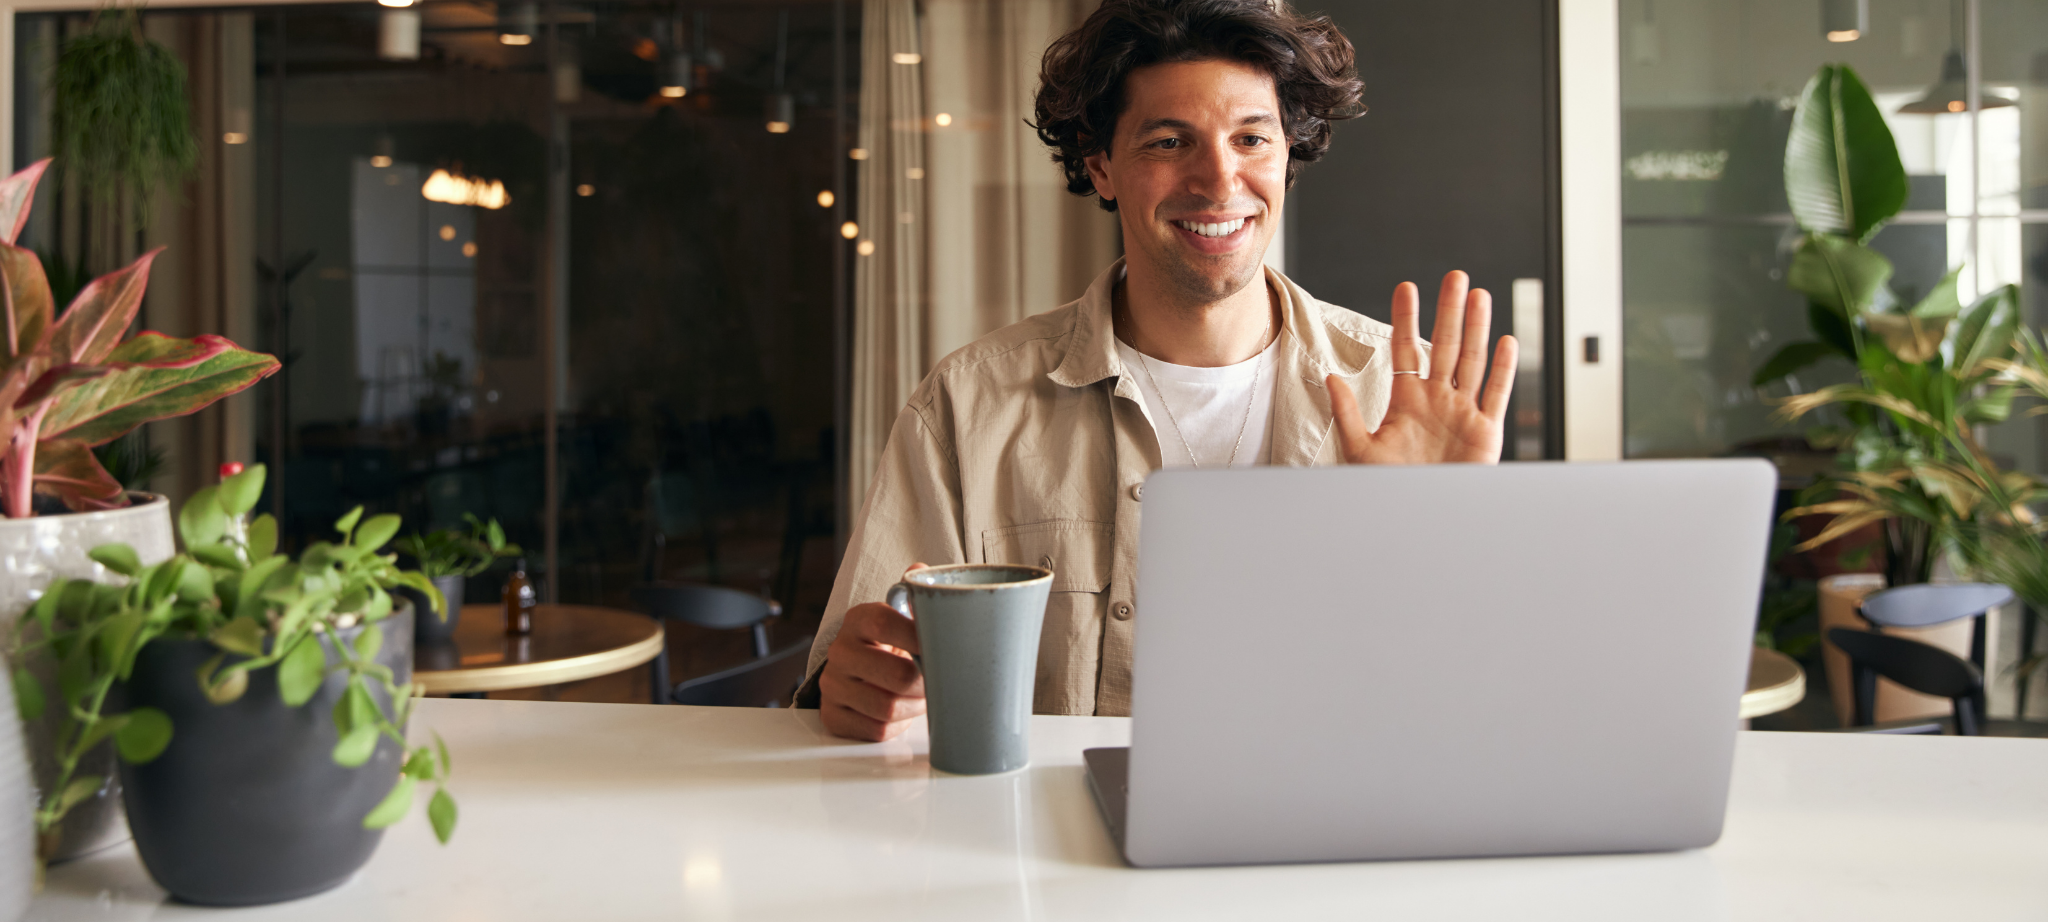  7 Free Online Video Conference Tools for Small Businesses